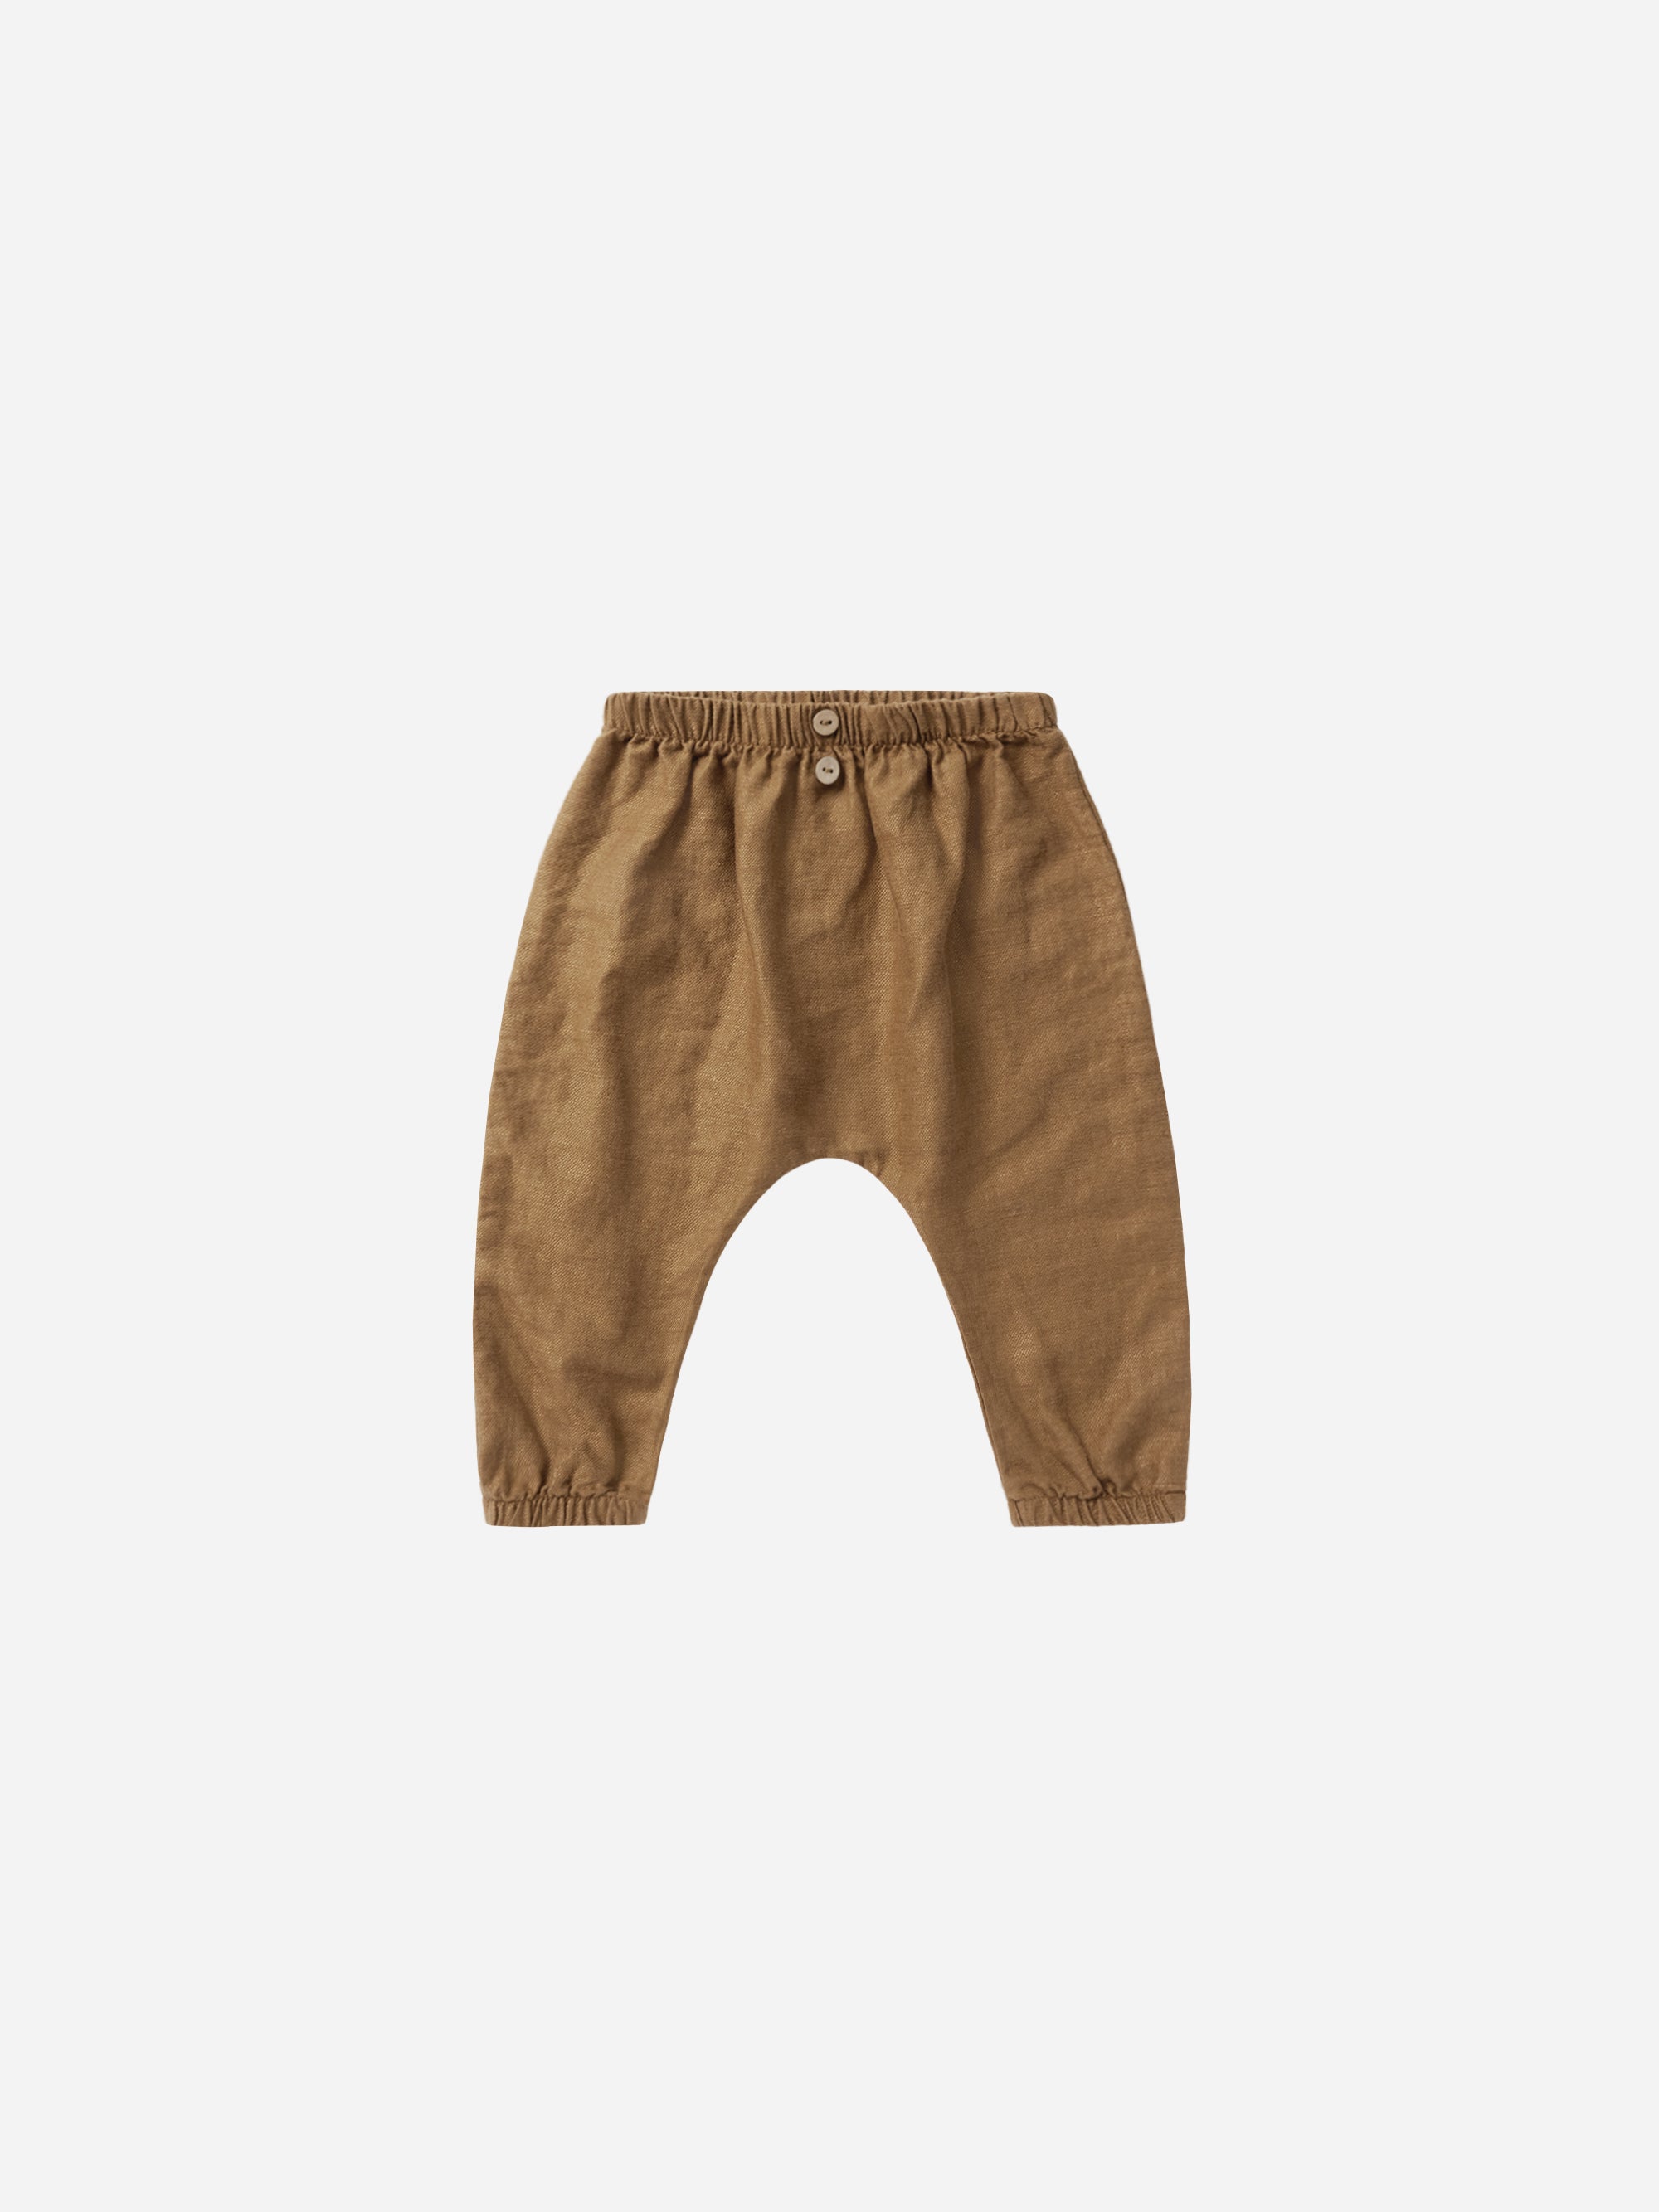 Woven Baby Pant || Saddle - Rylee + Cru | Kids Clothes | Trendy Baby Clothes | Modern Infant Outfits |